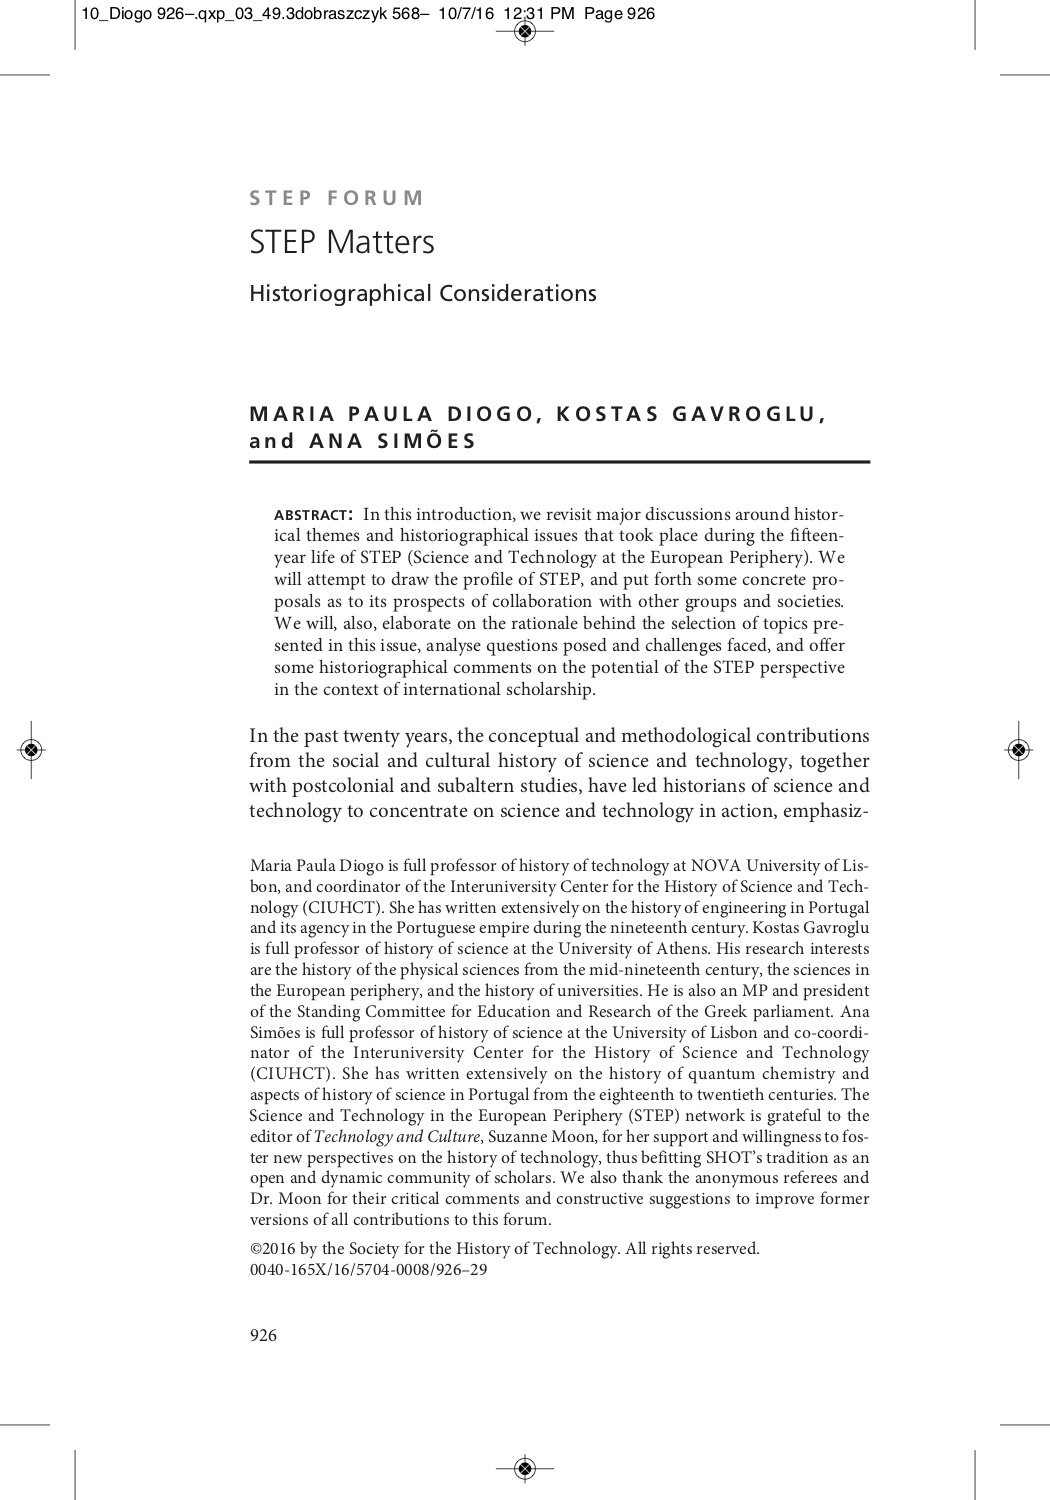 STEP Matters. Historiographical Considerations, Capa